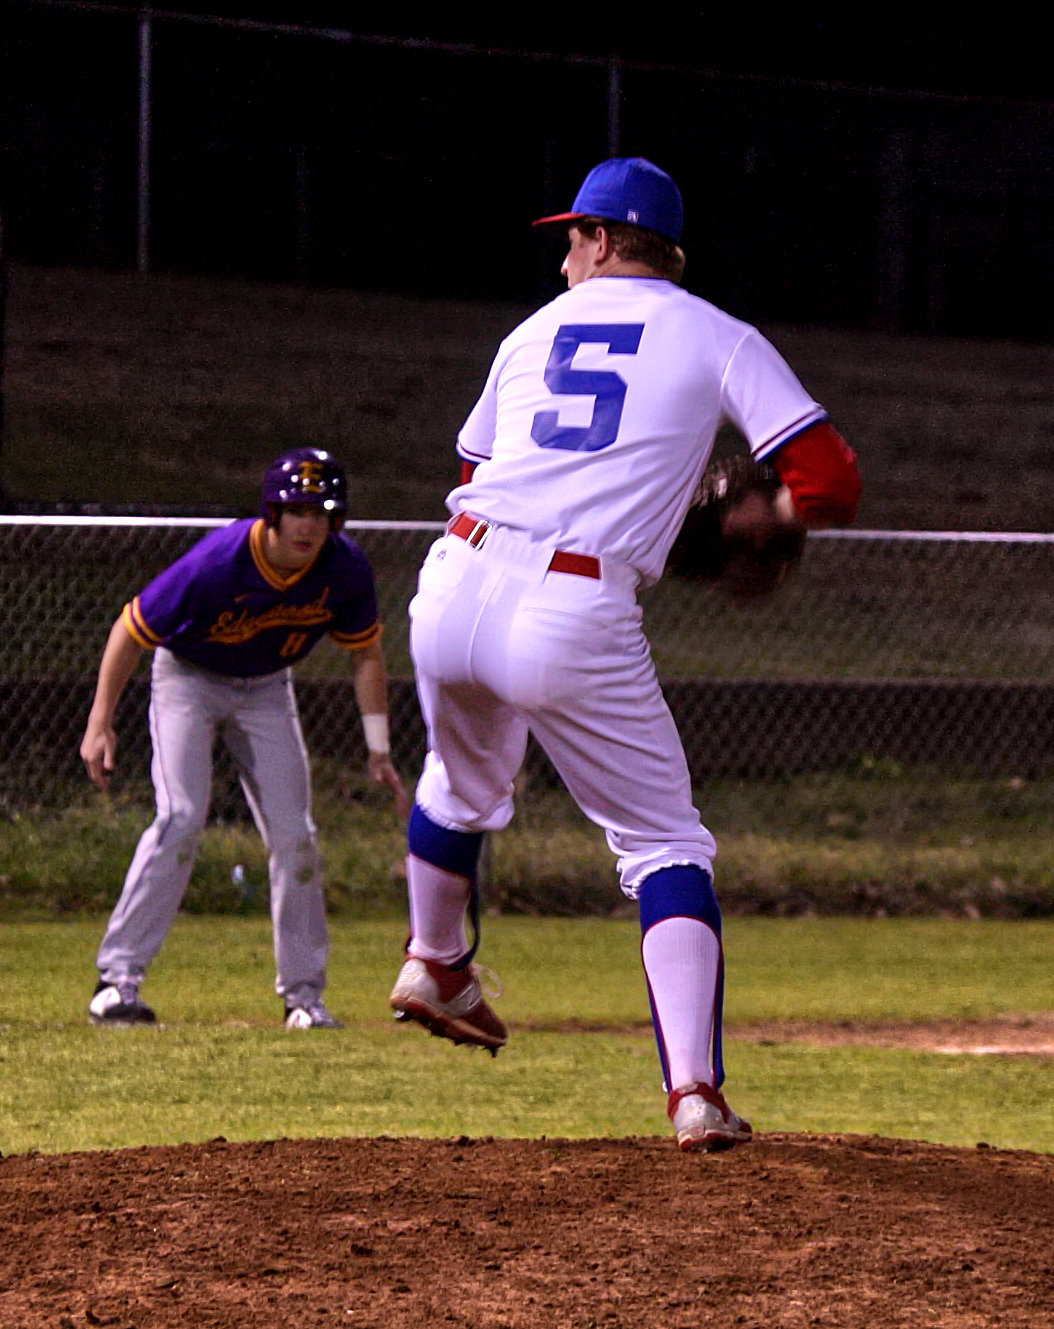 A too frequent sight last Friday night: The Panthers pitching from the stretch and an Edgewood runner on third base.